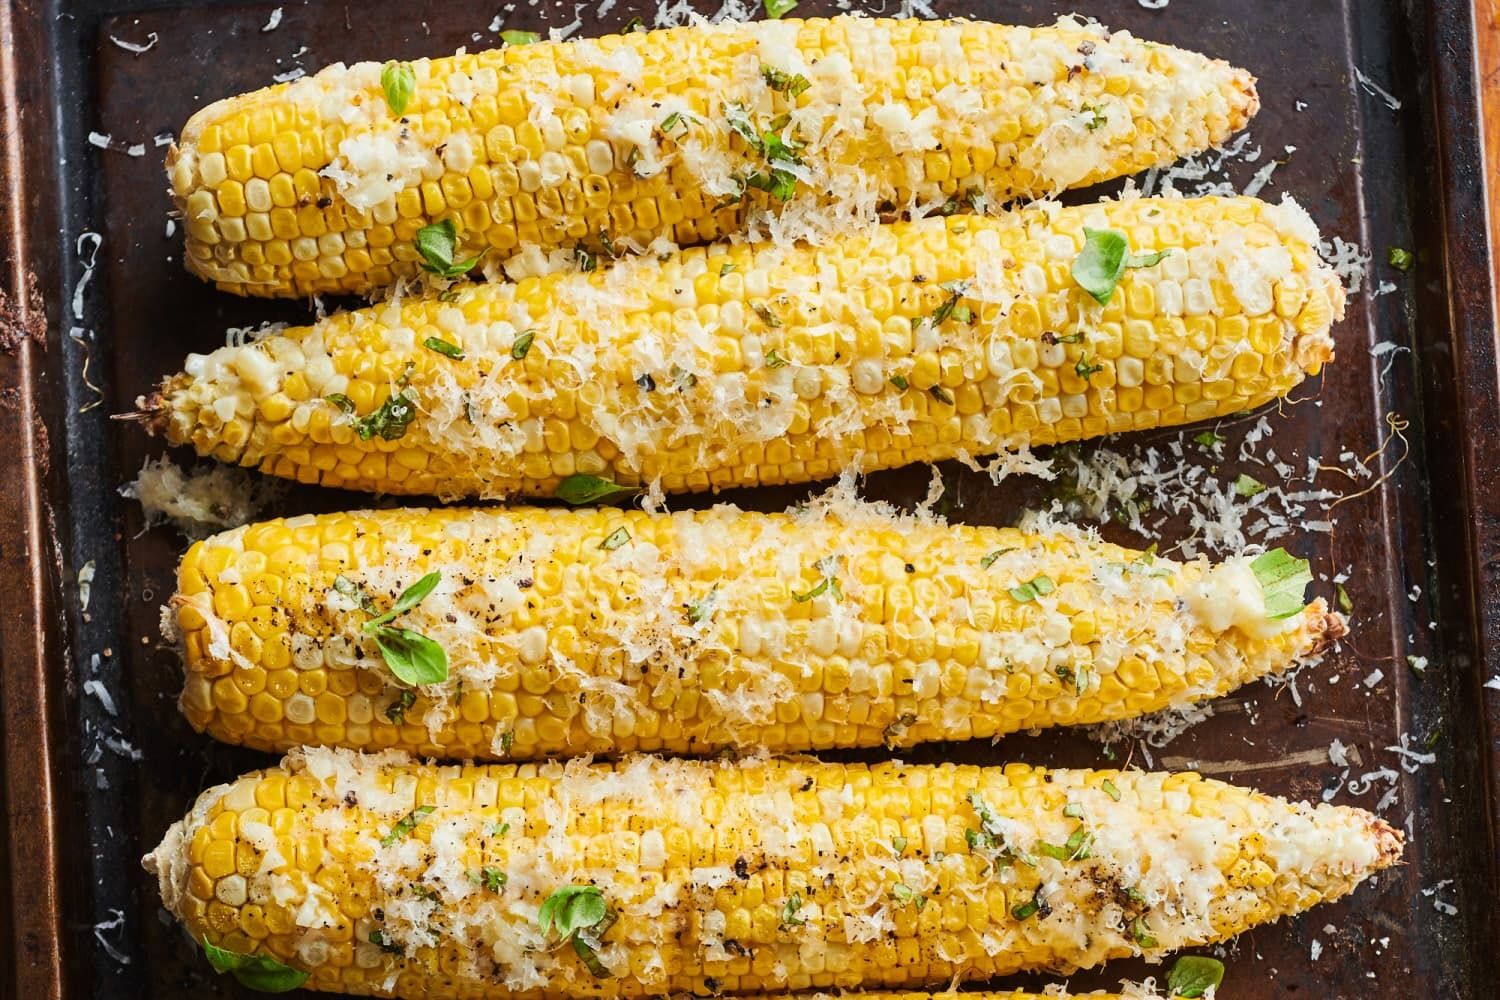 Corn and cheese in the oven